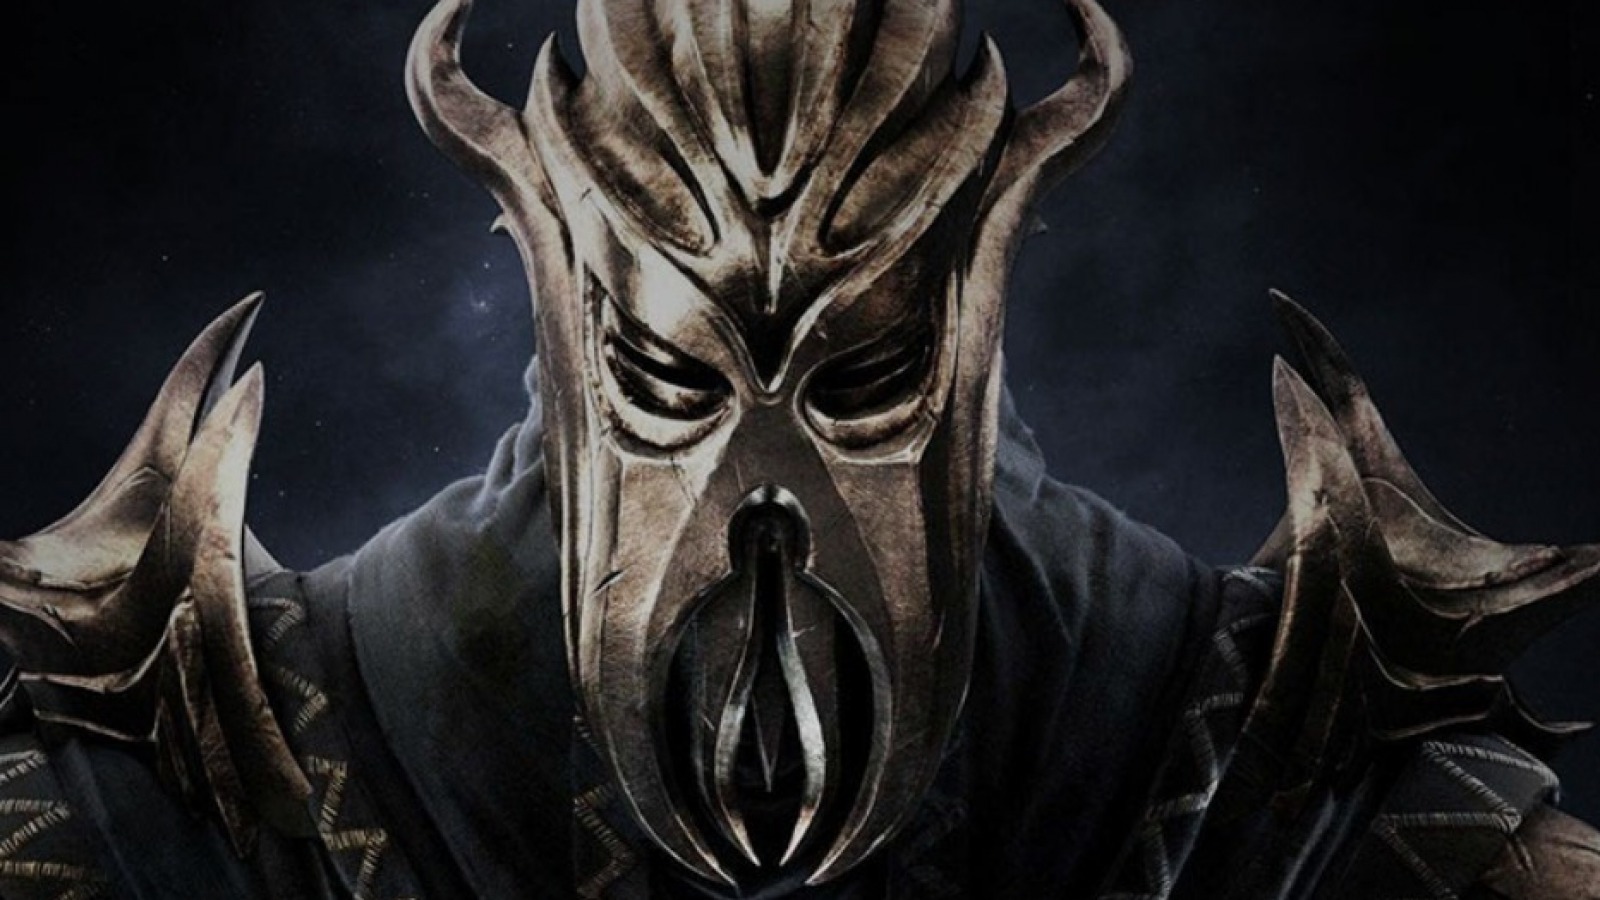 Elder Scrolls 6' Is Likely Being Delayed To Protect 'The Elder